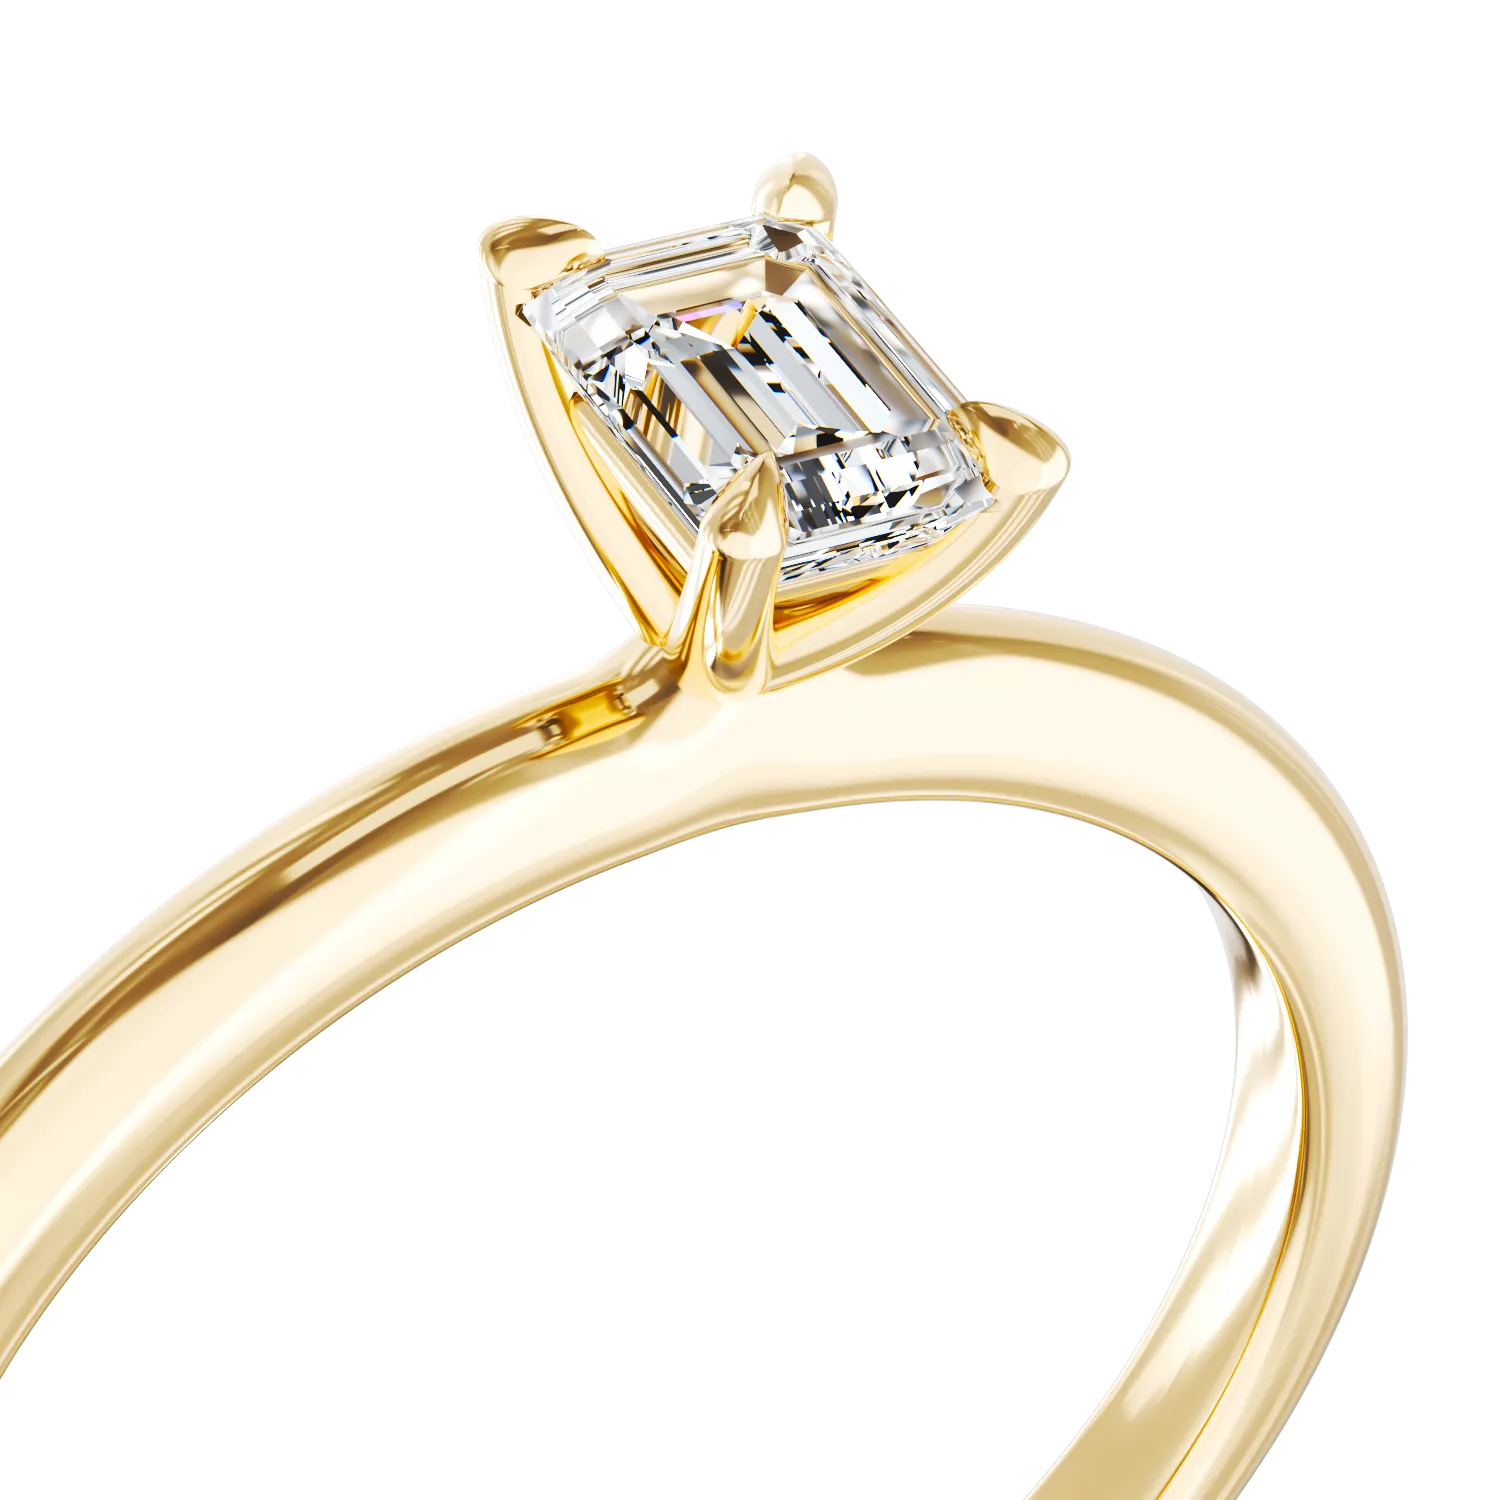 18K yellow gold engagement ring with diamonds of 0.3ct